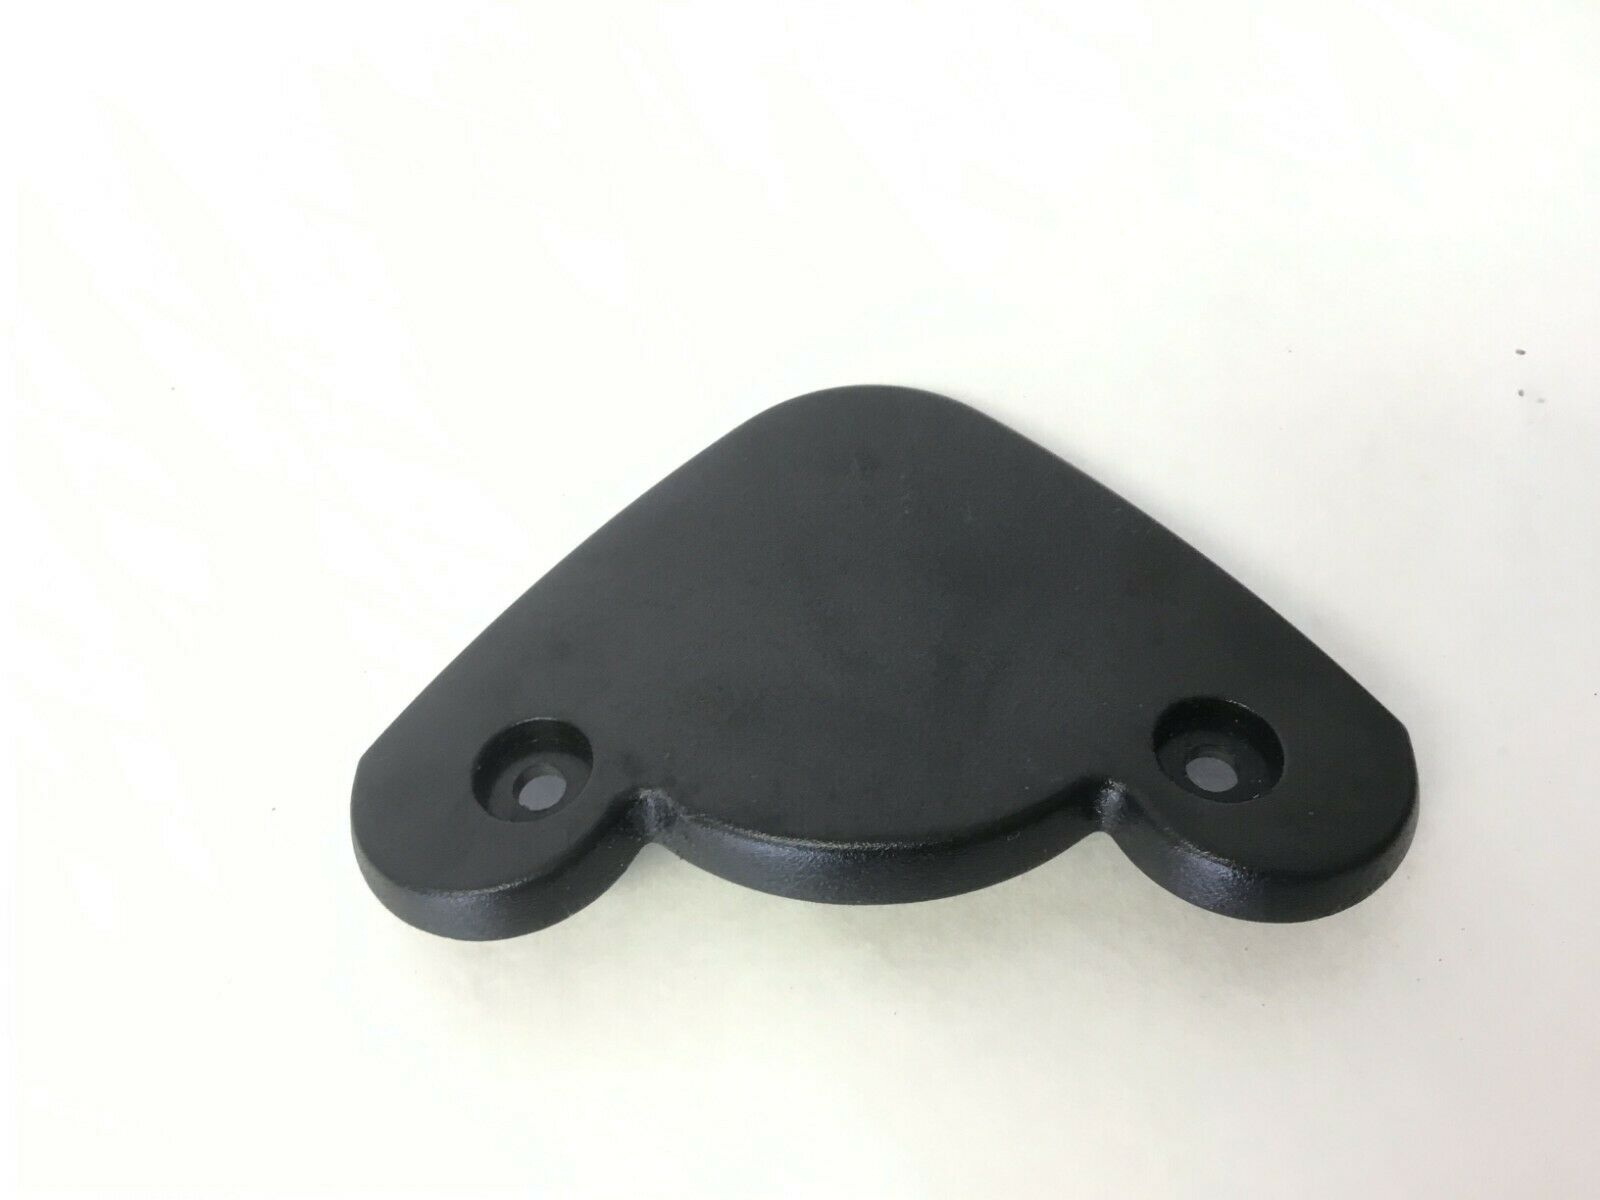 True Fitness Z5.1 Elliptical Rear Arm Track Cover (Used)